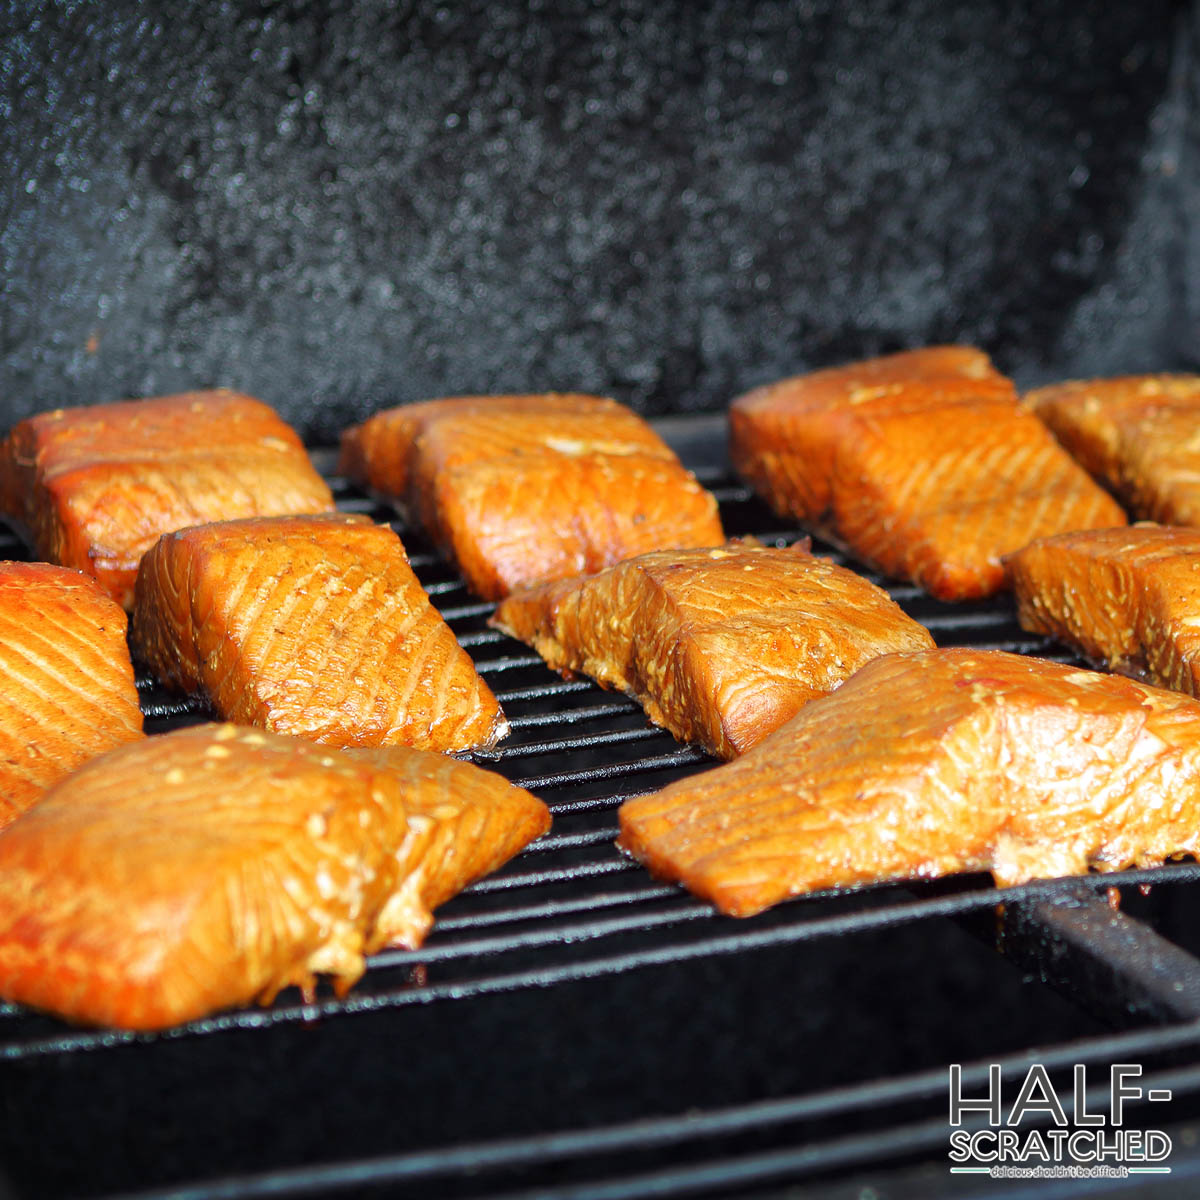 Salmon fillets in a smoker